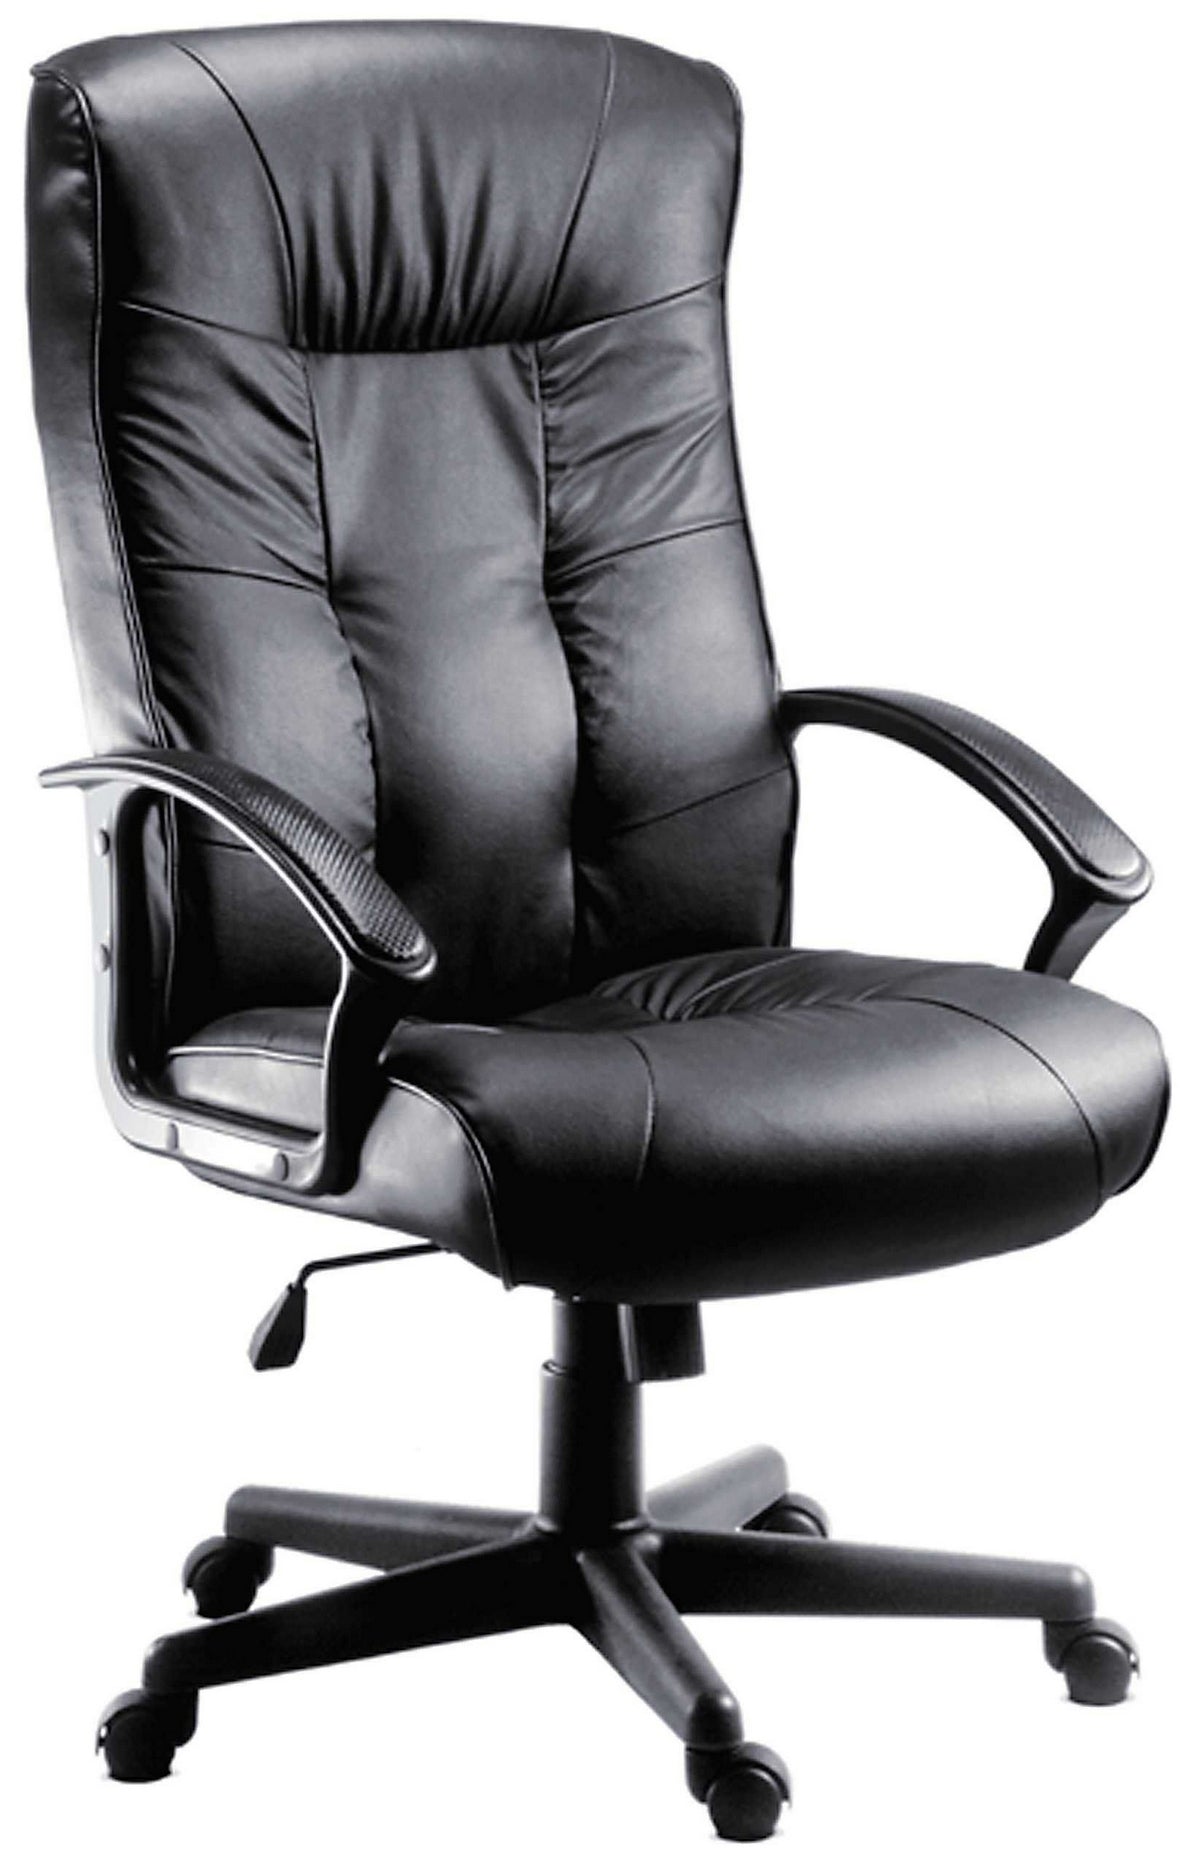 High Back Black Leather Executive Chair - GLOUCESTER UK